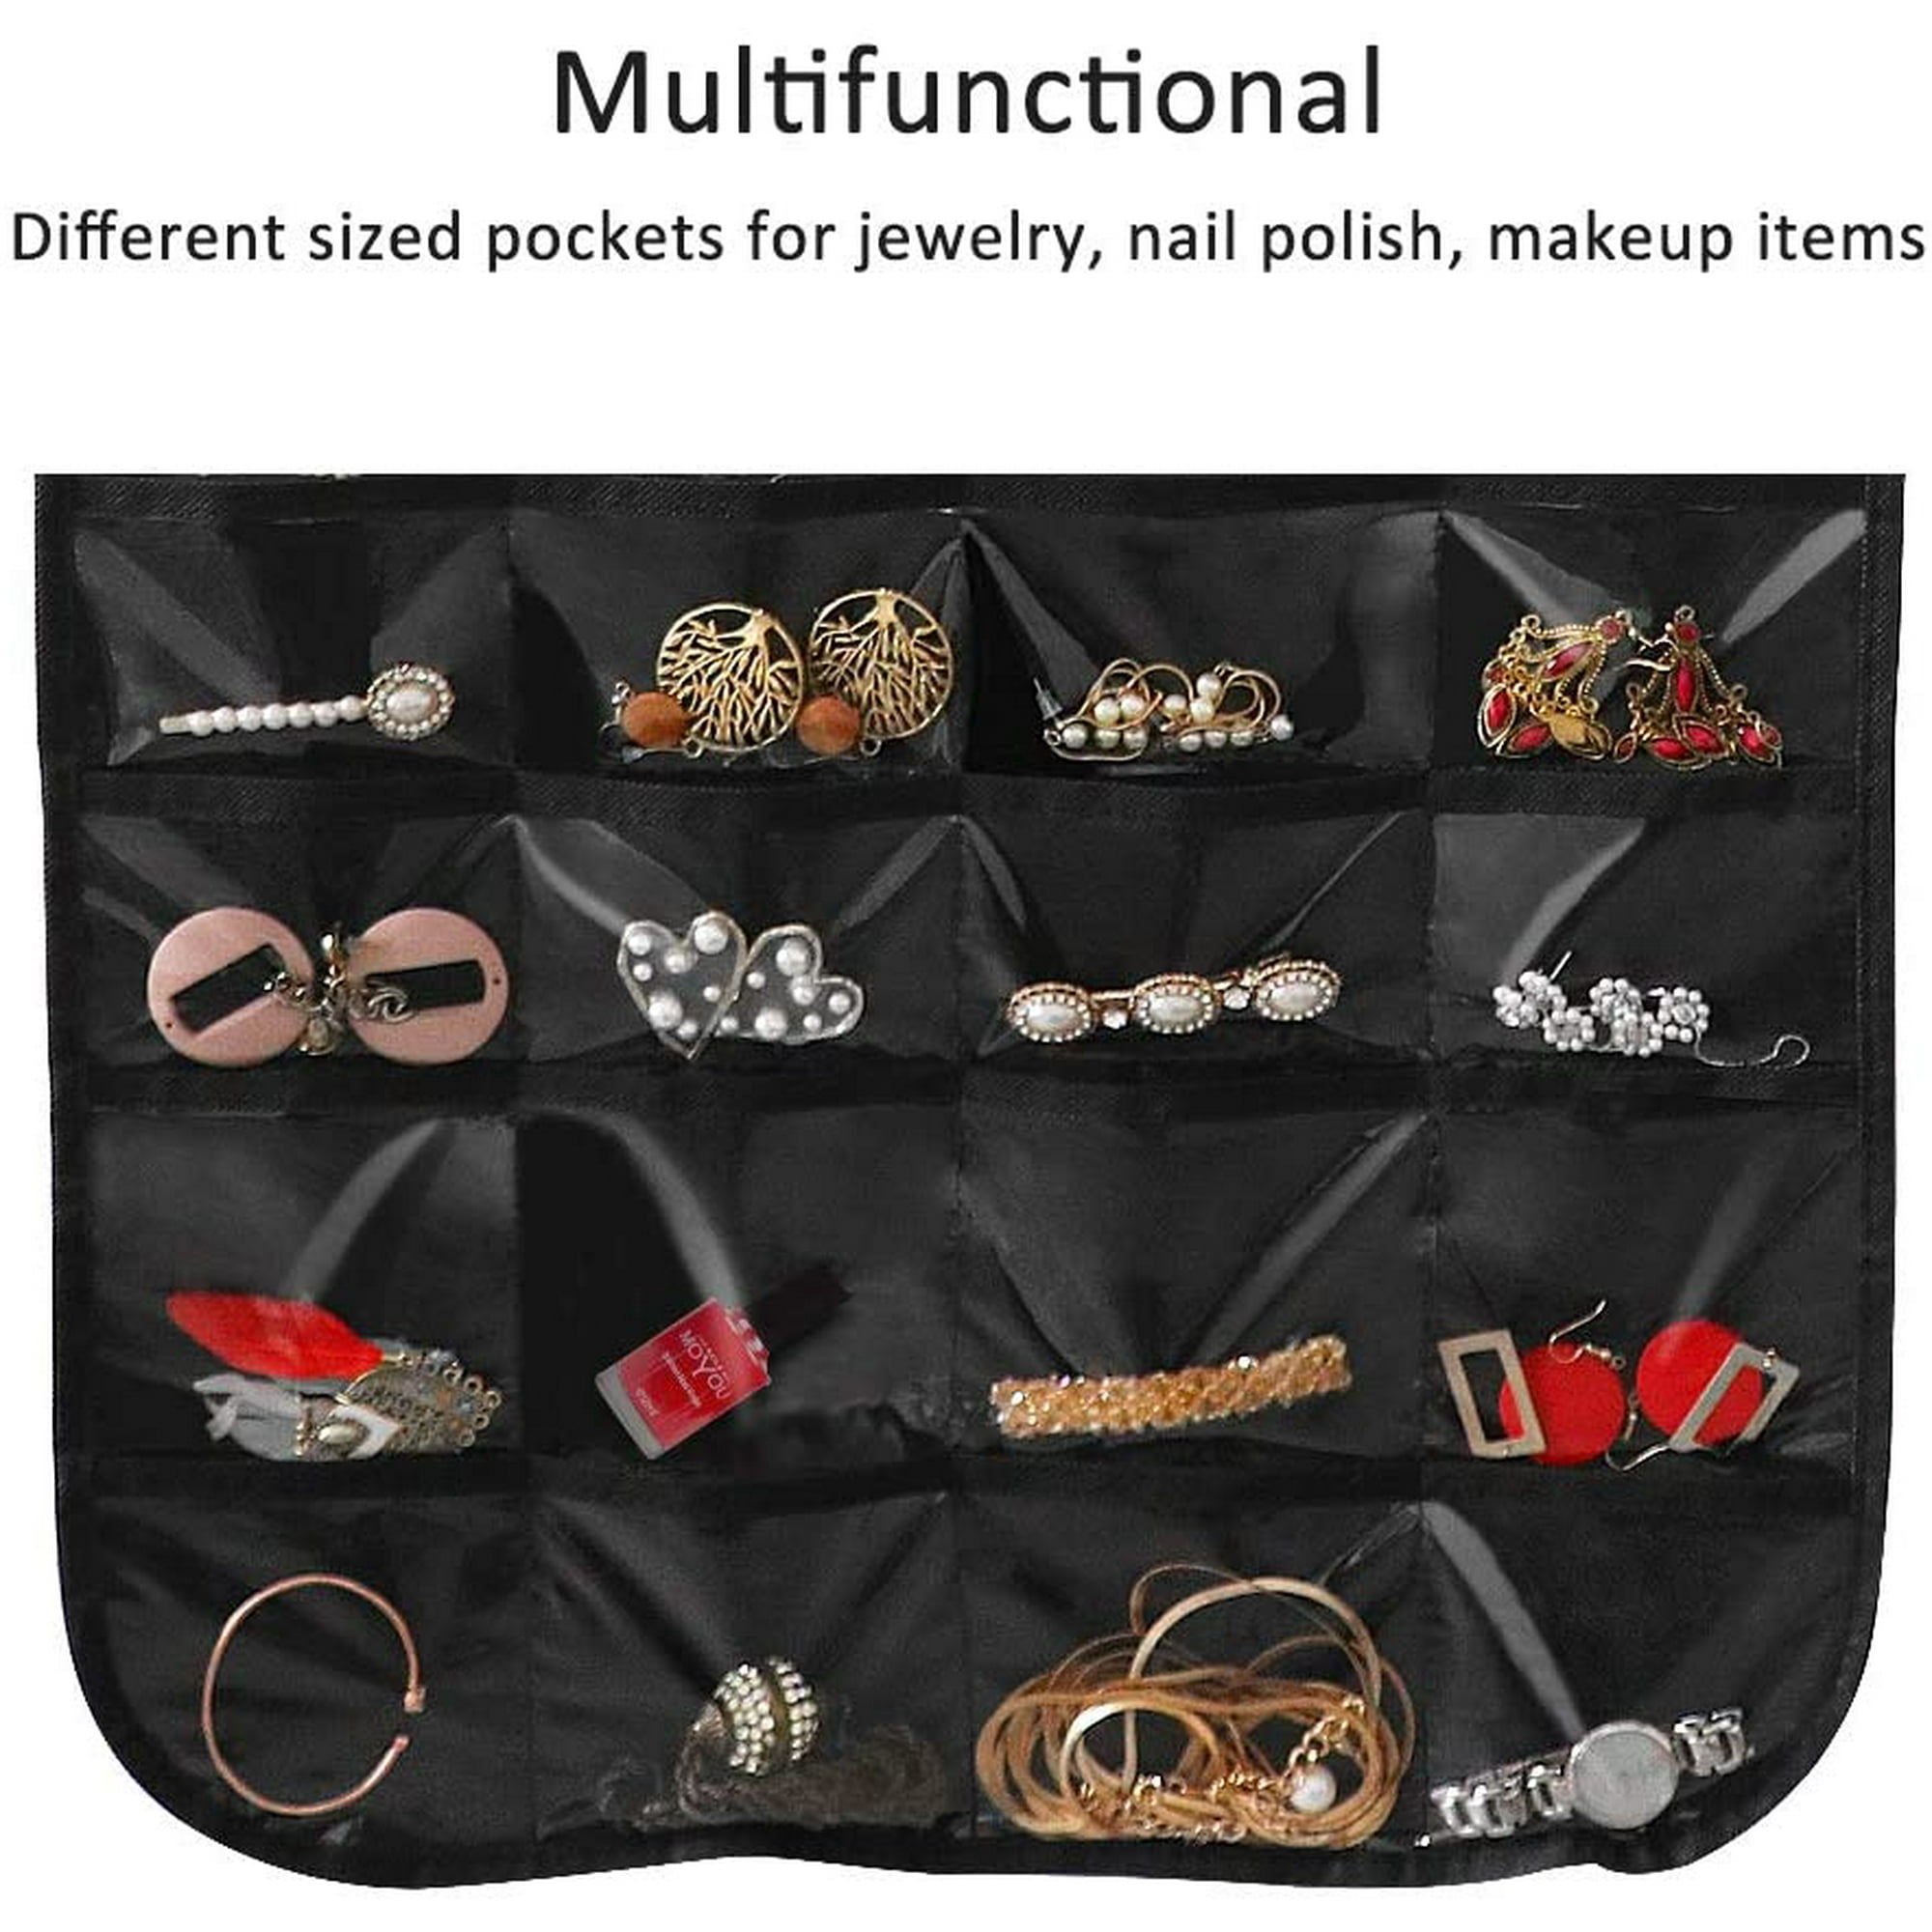 Black Jewelry Organizer Hanging Bag 40 Pockets & 20 Hook-and-loop Tabs Earrings Necklace Bracelet Holder Dual Sided Space-Saving Household Closet Accessory Storage Bag with Hanger 